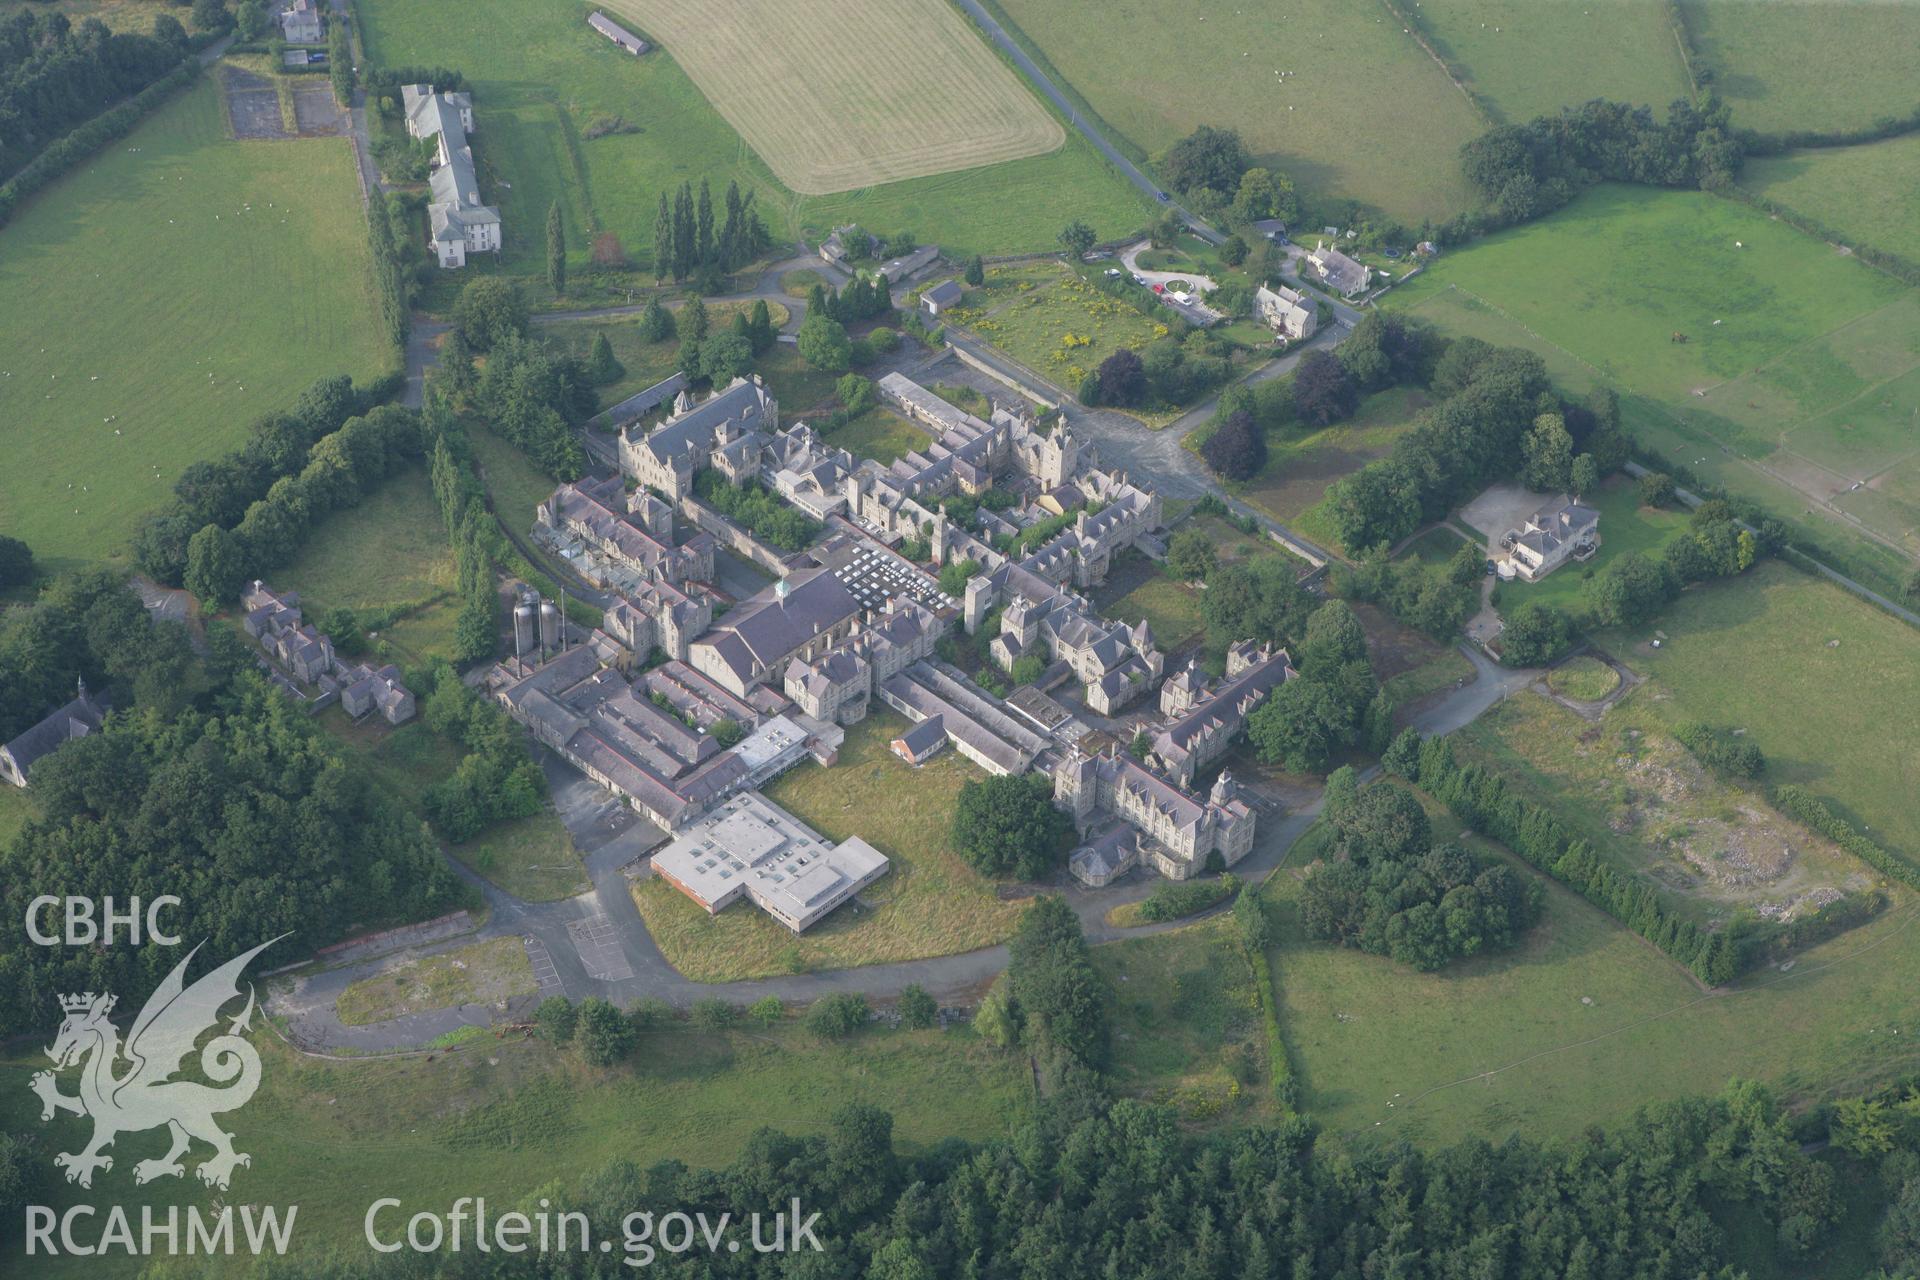 RCAHMW colour oblique photograph of North Wales Counties Mental Hospital Complex towards Denbigh. Taken by Toby Driver on 24/07/2008.